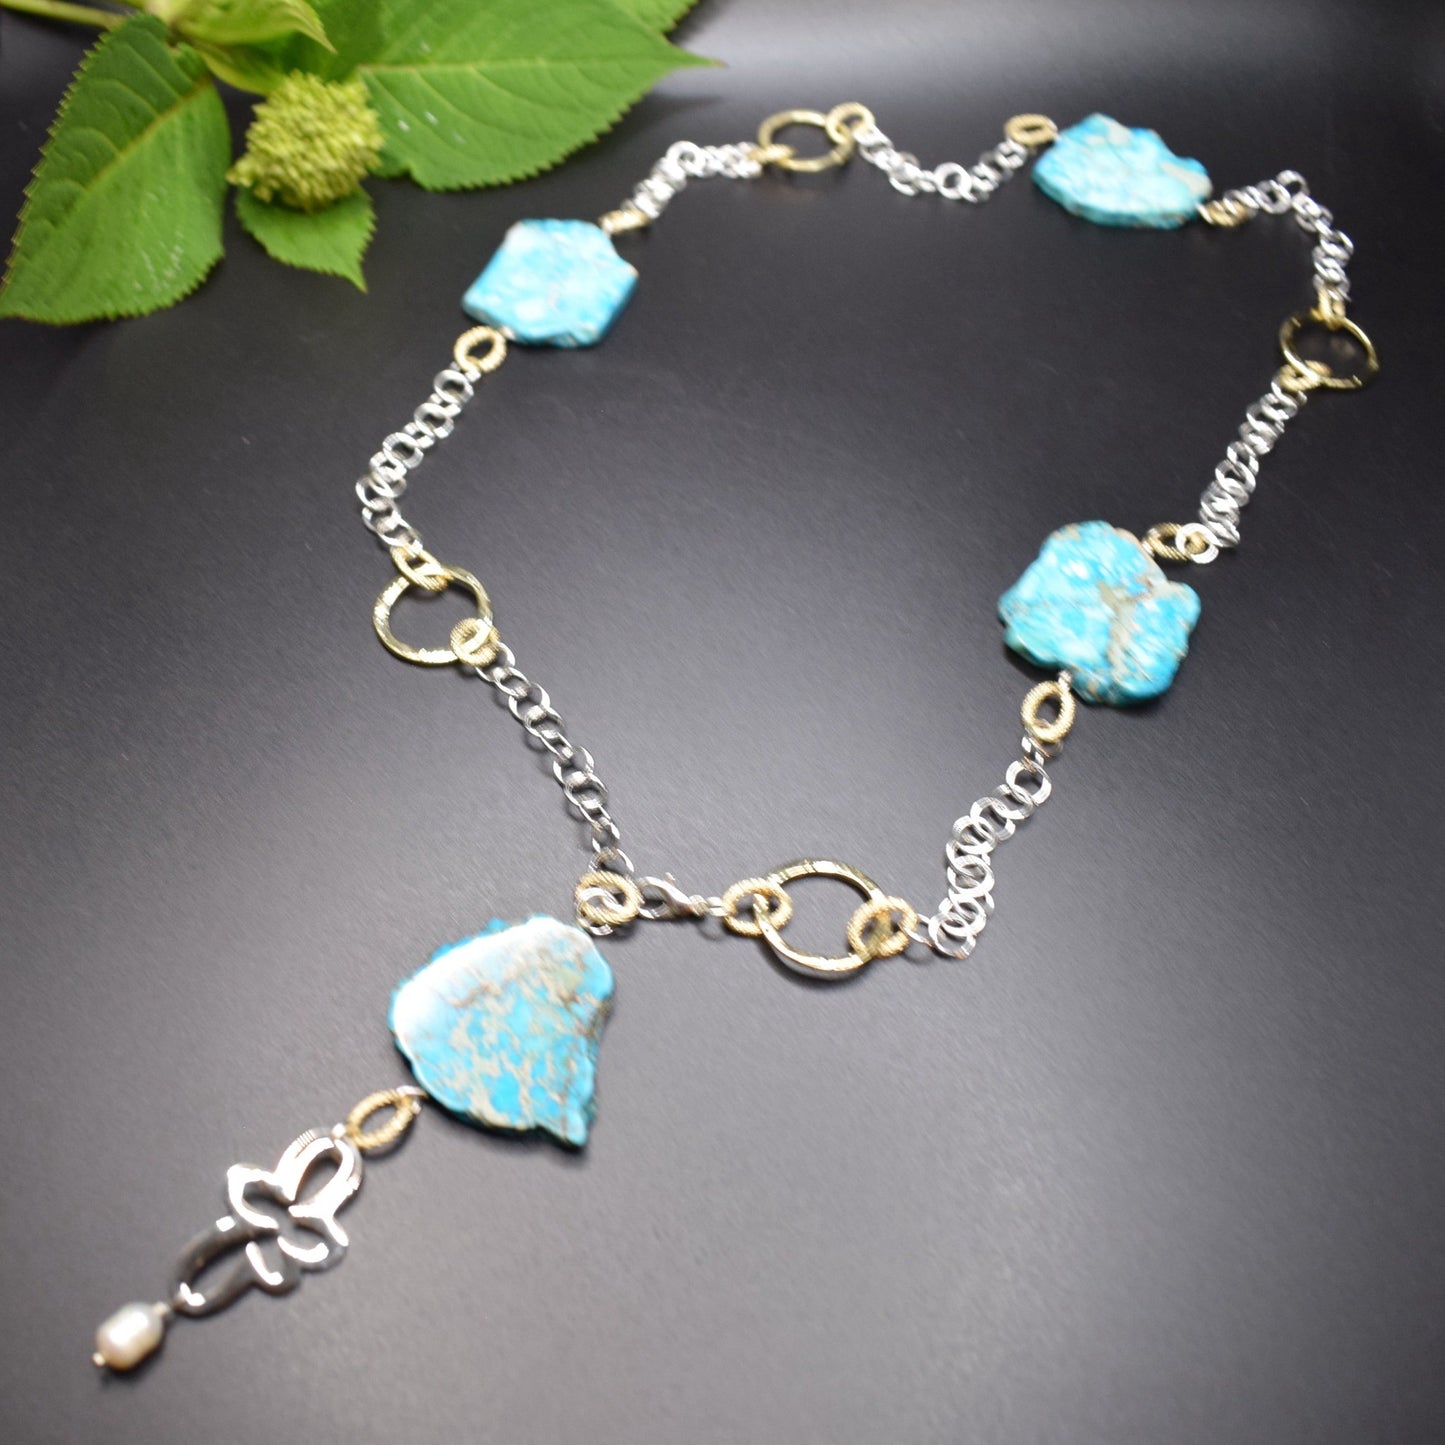 Necklace Happy blue necklace with imperial jasper stones chain and gold details and flower